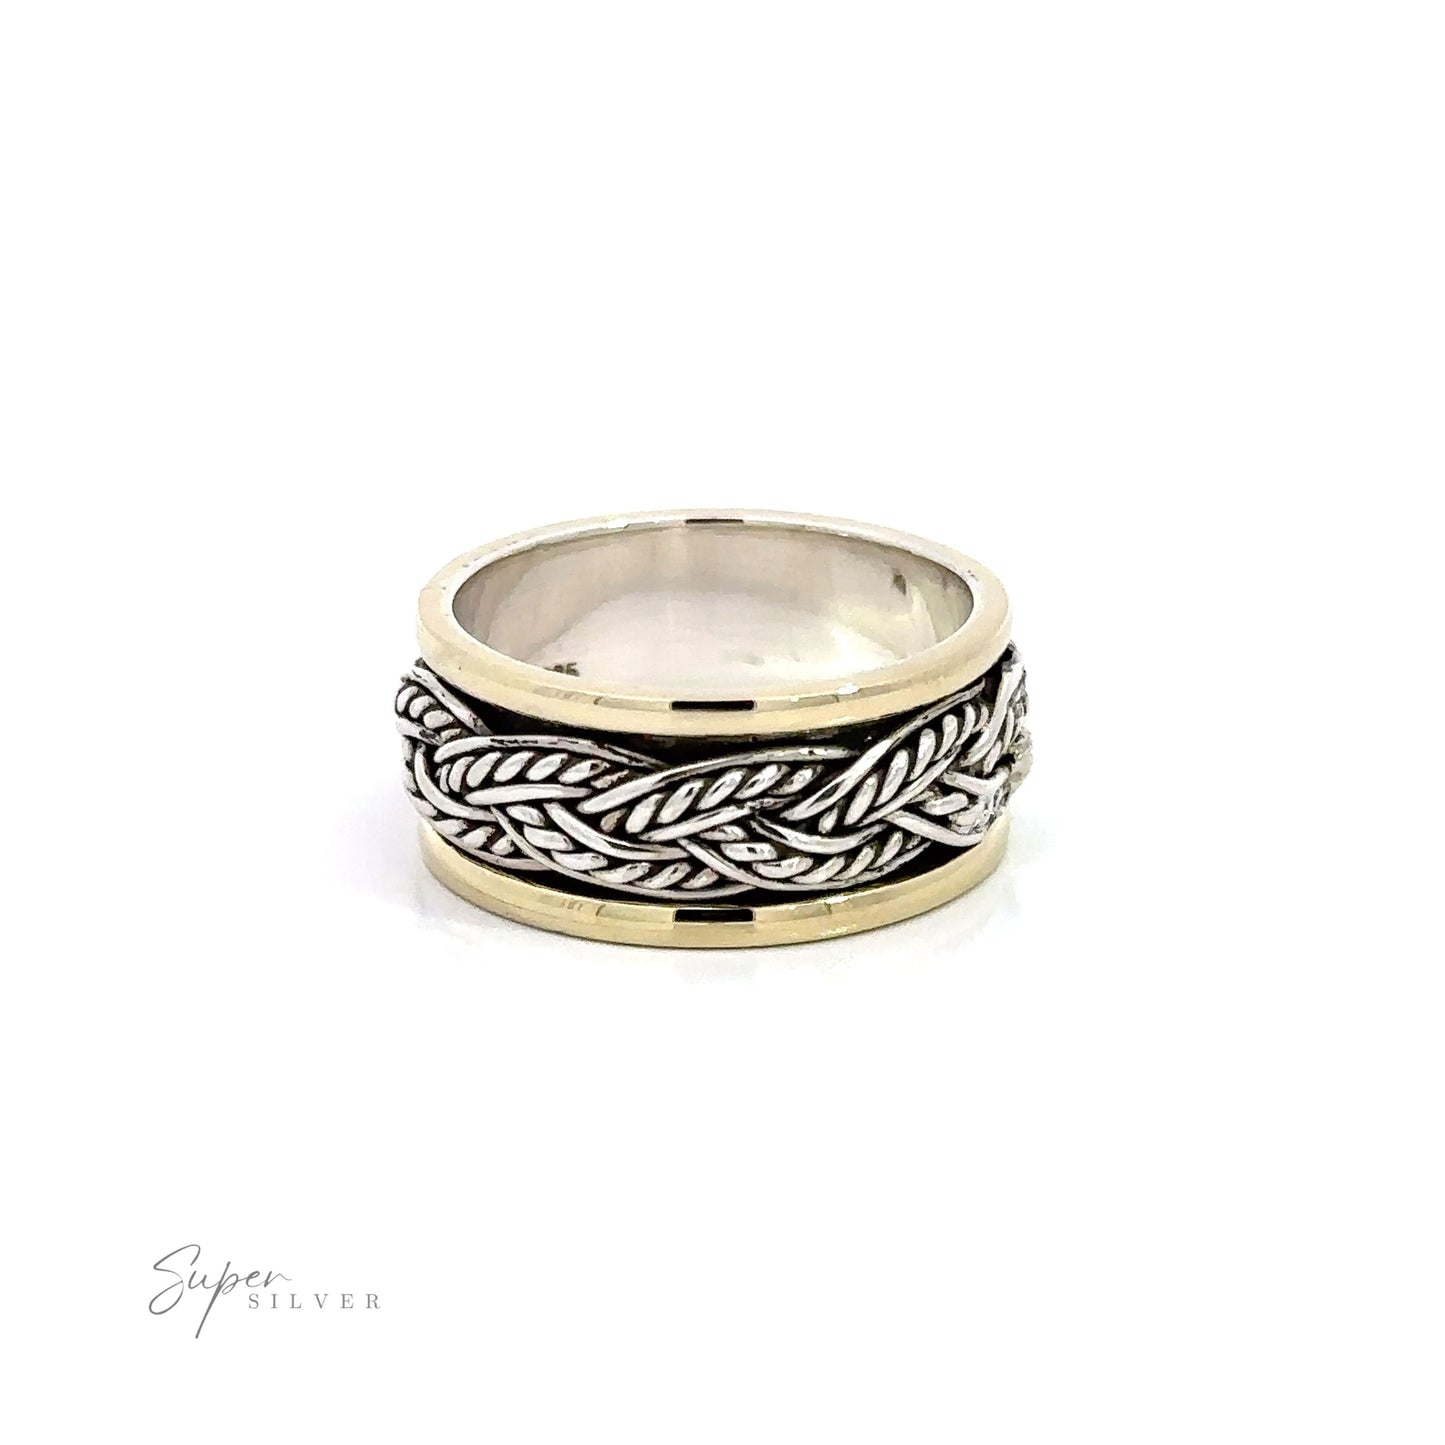 A silver and gold-plated Handmade Rope Spinner Ring with a braided pattern.